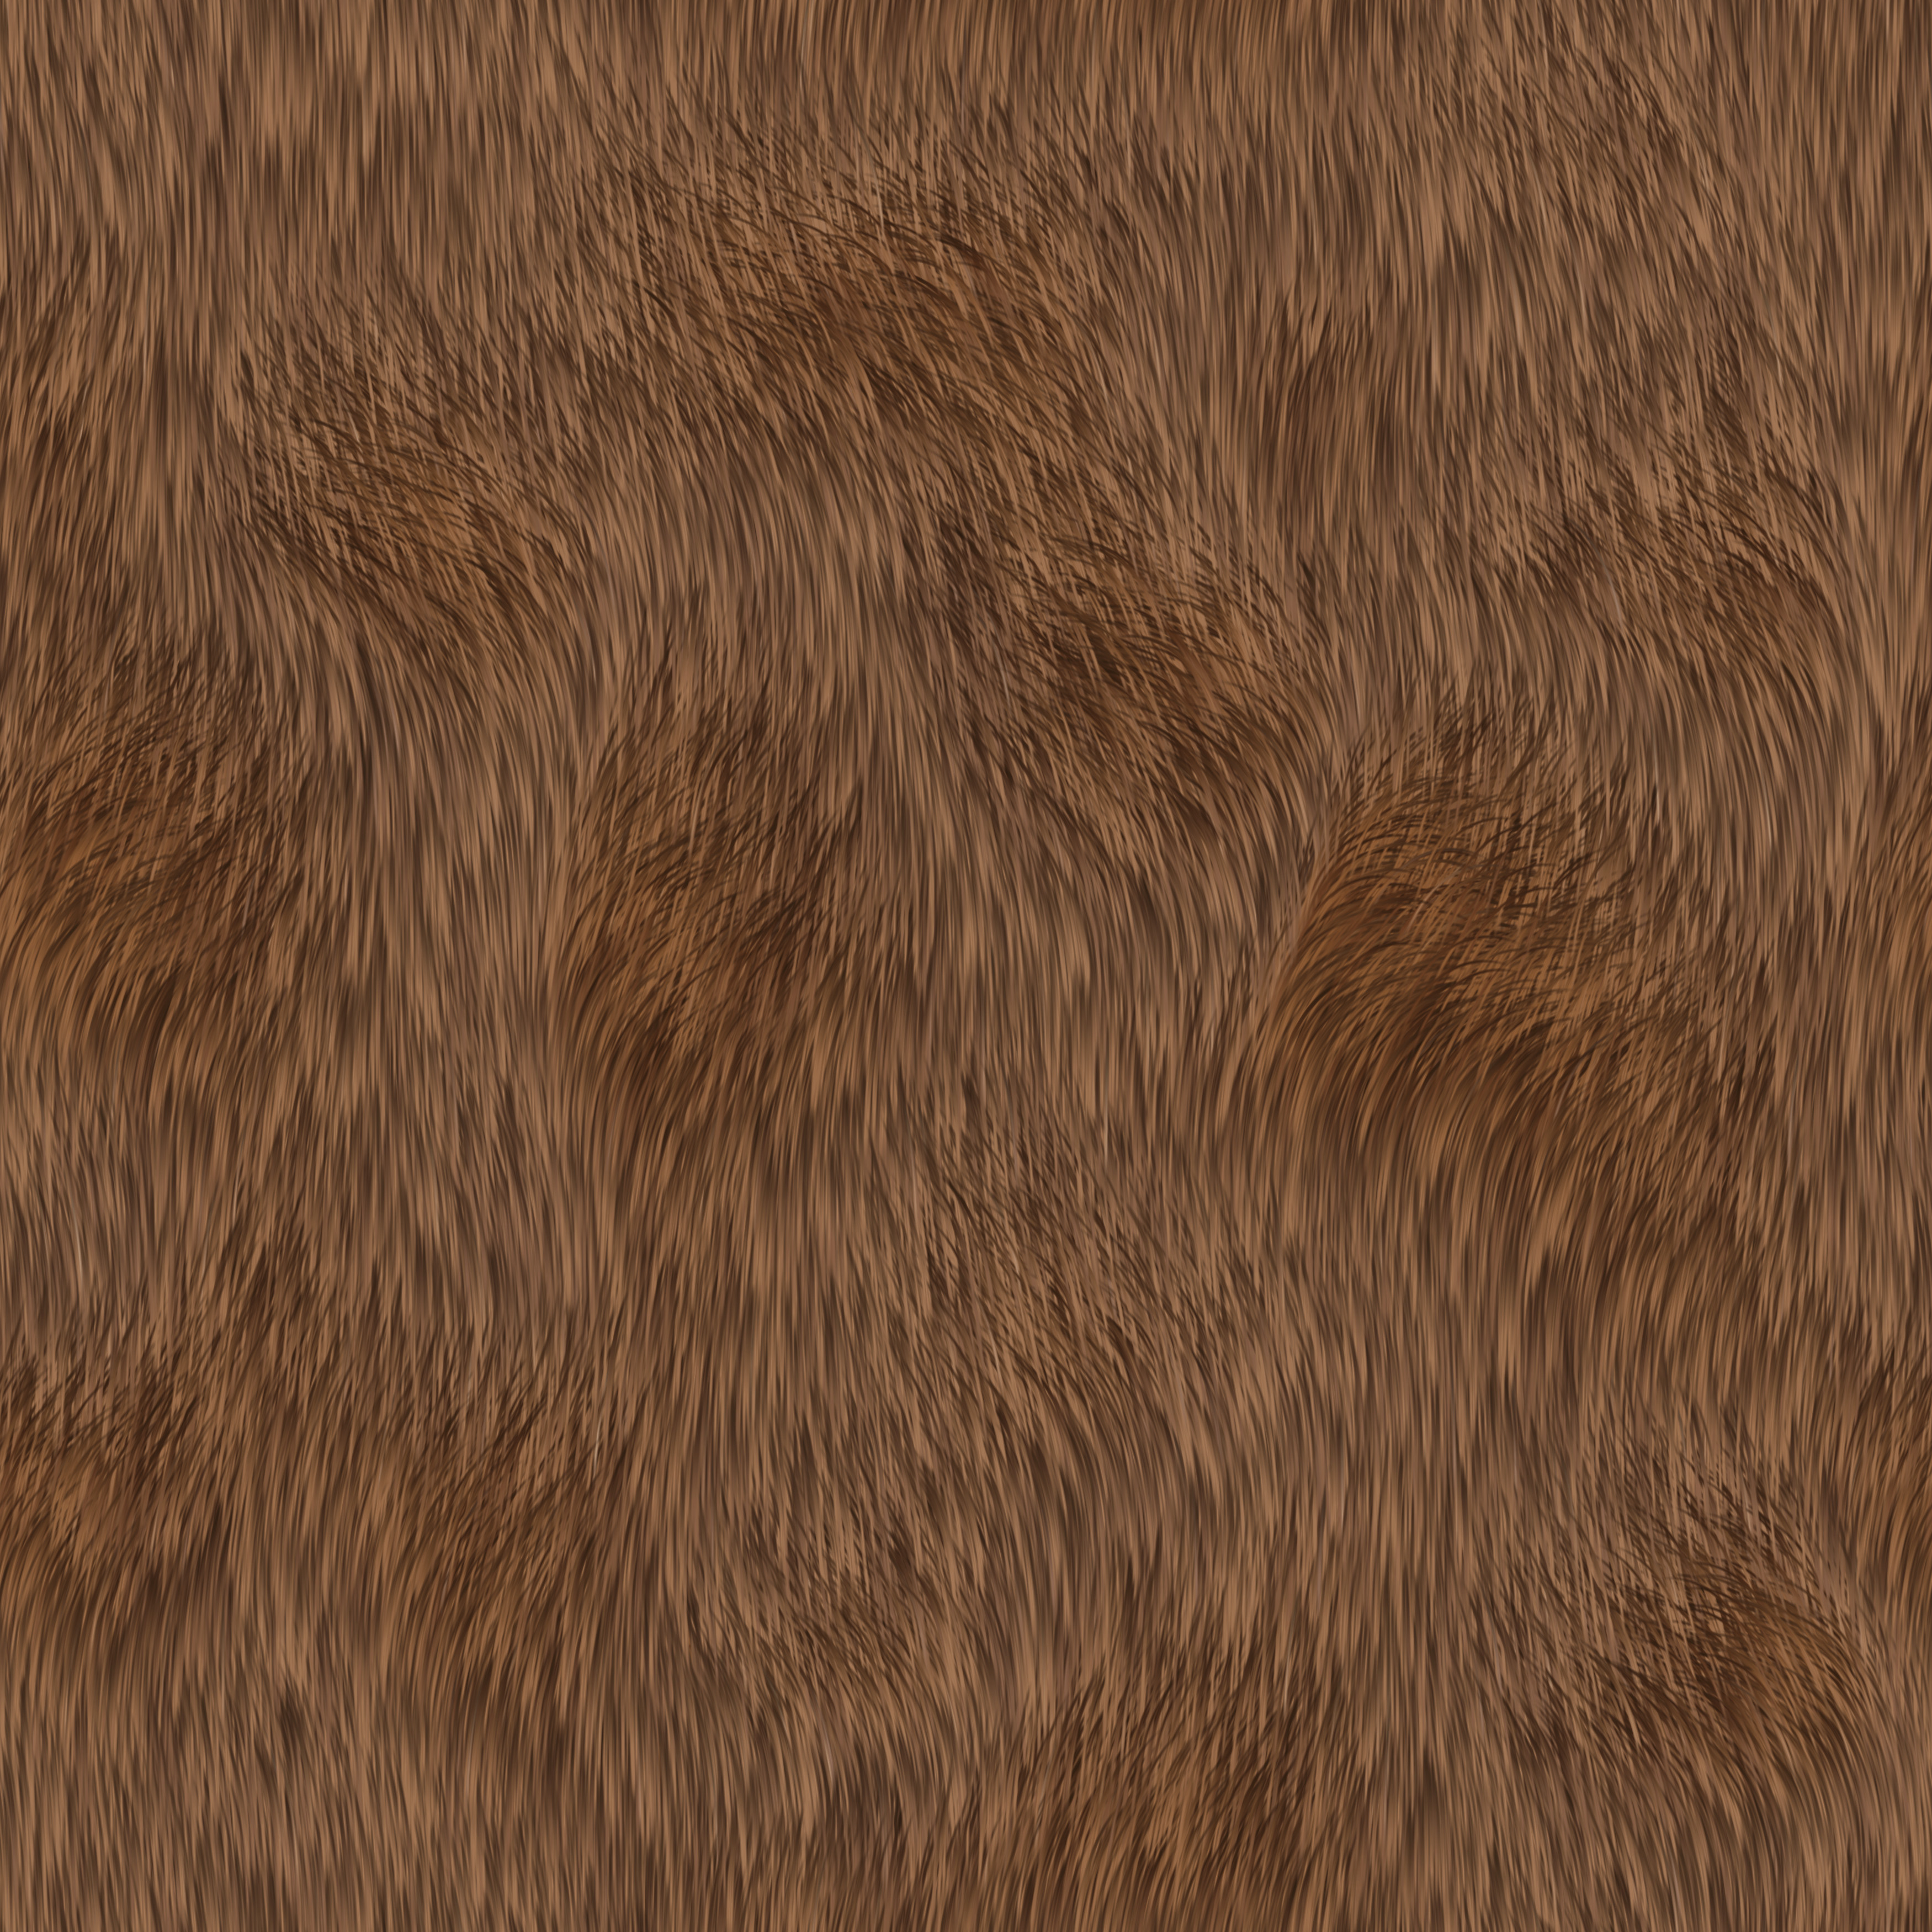 Free Stock Photo of Brown fluffy animal fur texture